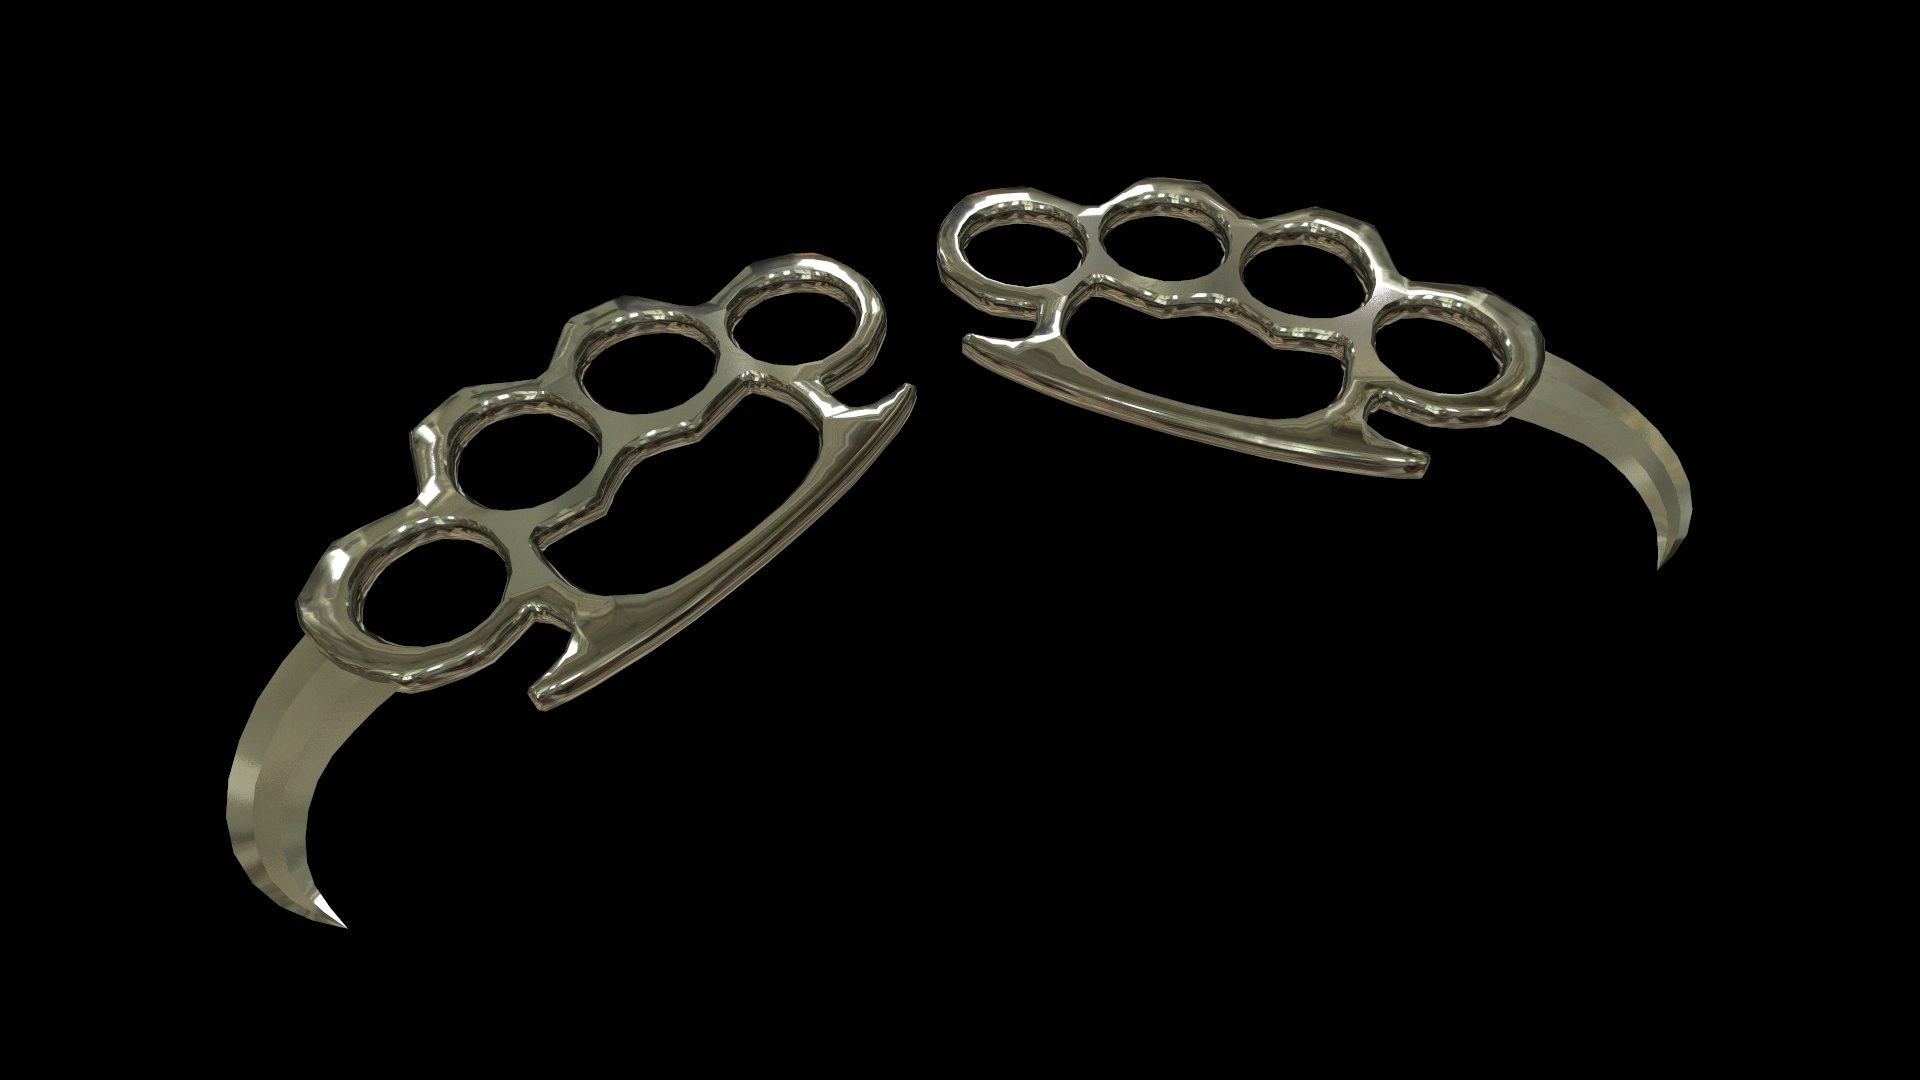 Are Brass Knuckles Legal? - Firearms Legal Protection